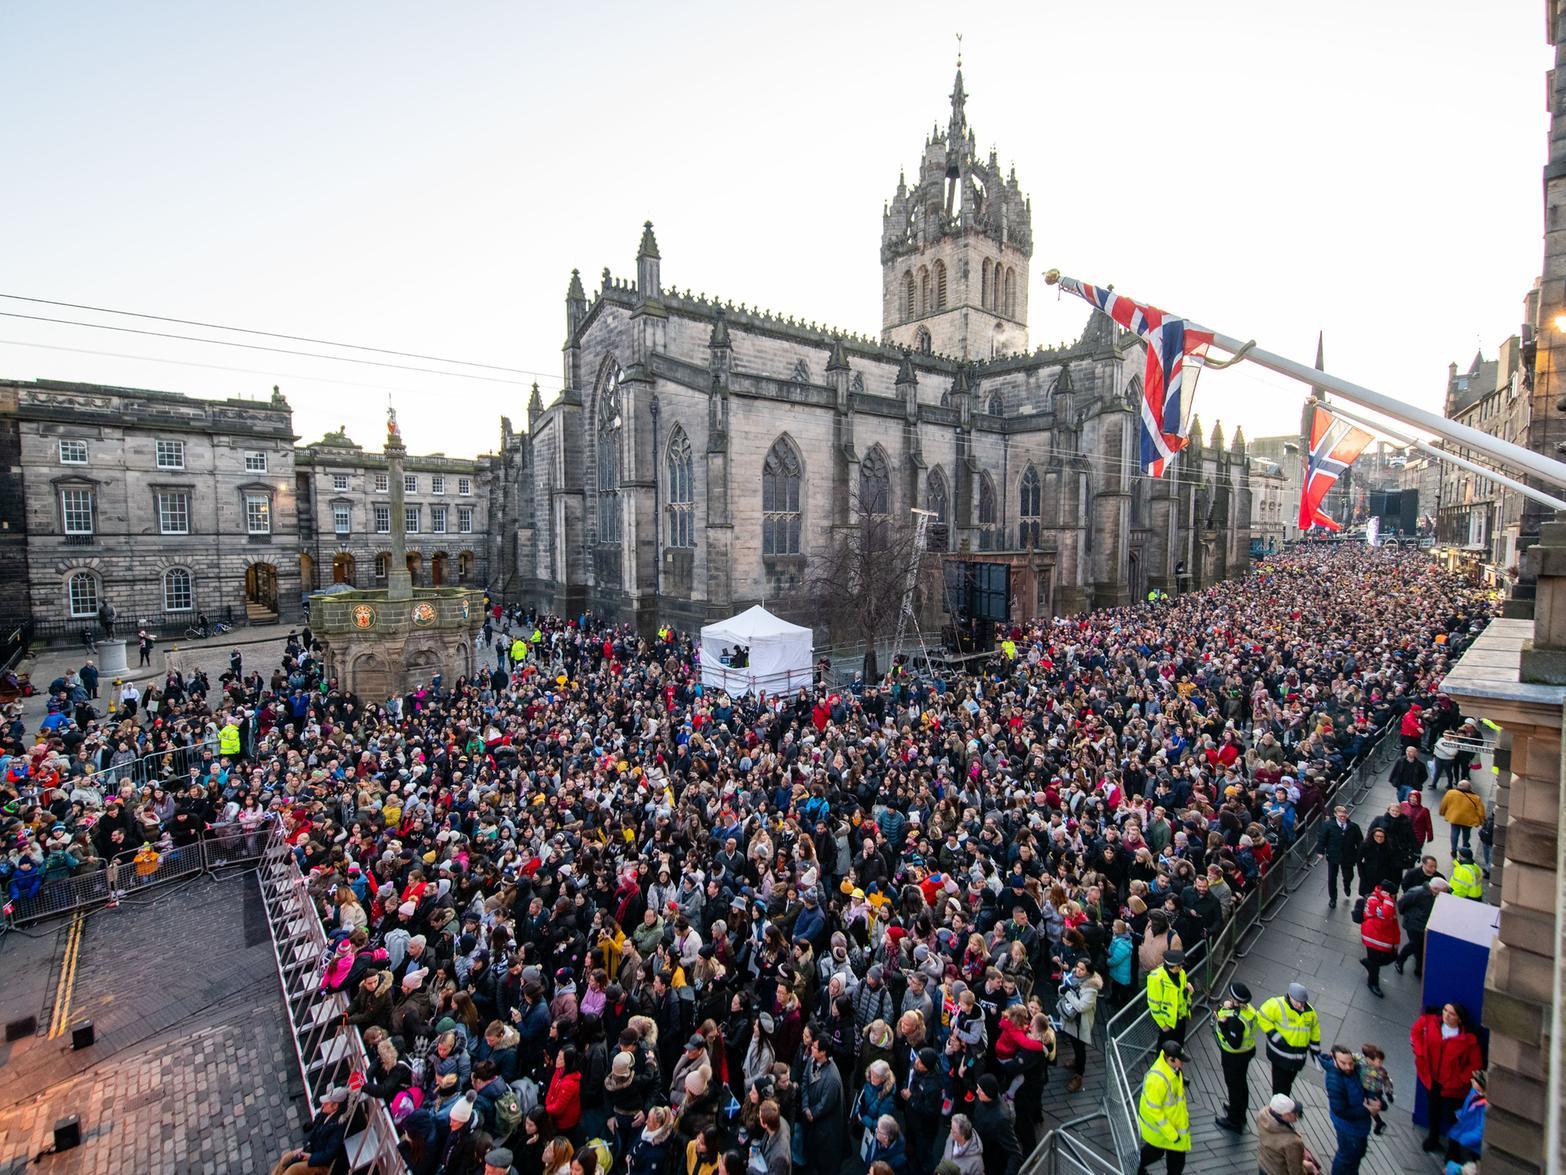 Thousands of people huddled on the busiest streets of the Capital to witness the switching on of the Christmas lights, an event that marks the beginning of the festive season in the Capital every year.